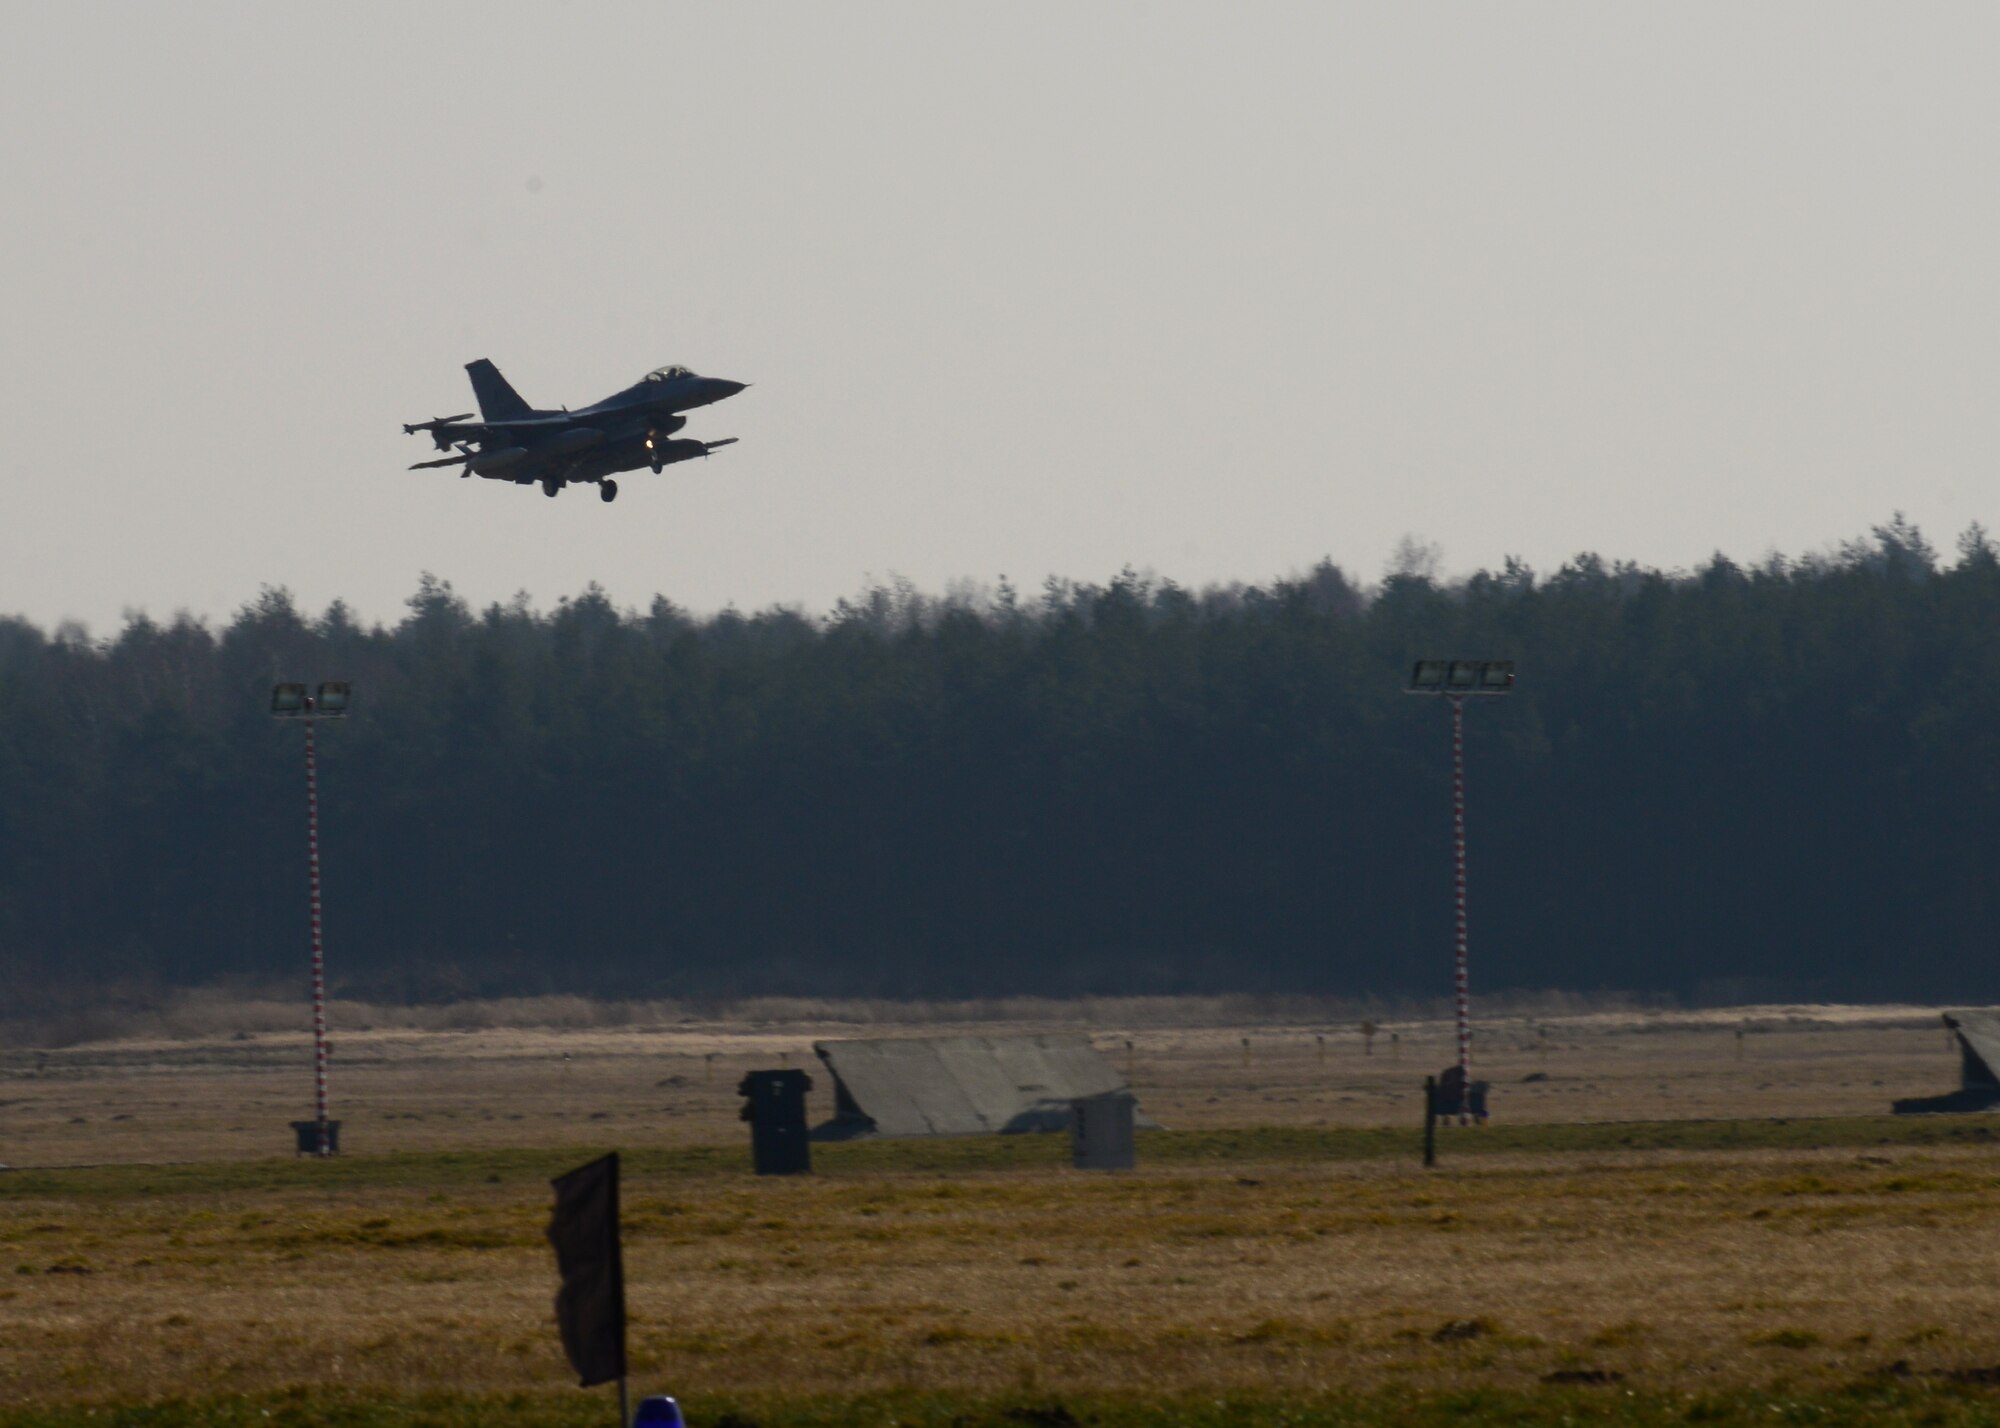 An F-16 Fighting Falcon assigned to the 555th Fighter Squadron from Aviano Air Base, Italy, lands March 14, 2014, at Lask Air Base, Poland. A total of twelve 555th Fighter Squadron F-16s and about 240 service members arrived to augment an off-site training event, which demonstrates an enduring partnership with NATO allies. (U.S. Air Force photo/Airman 1st Class Ryan Conroy) 